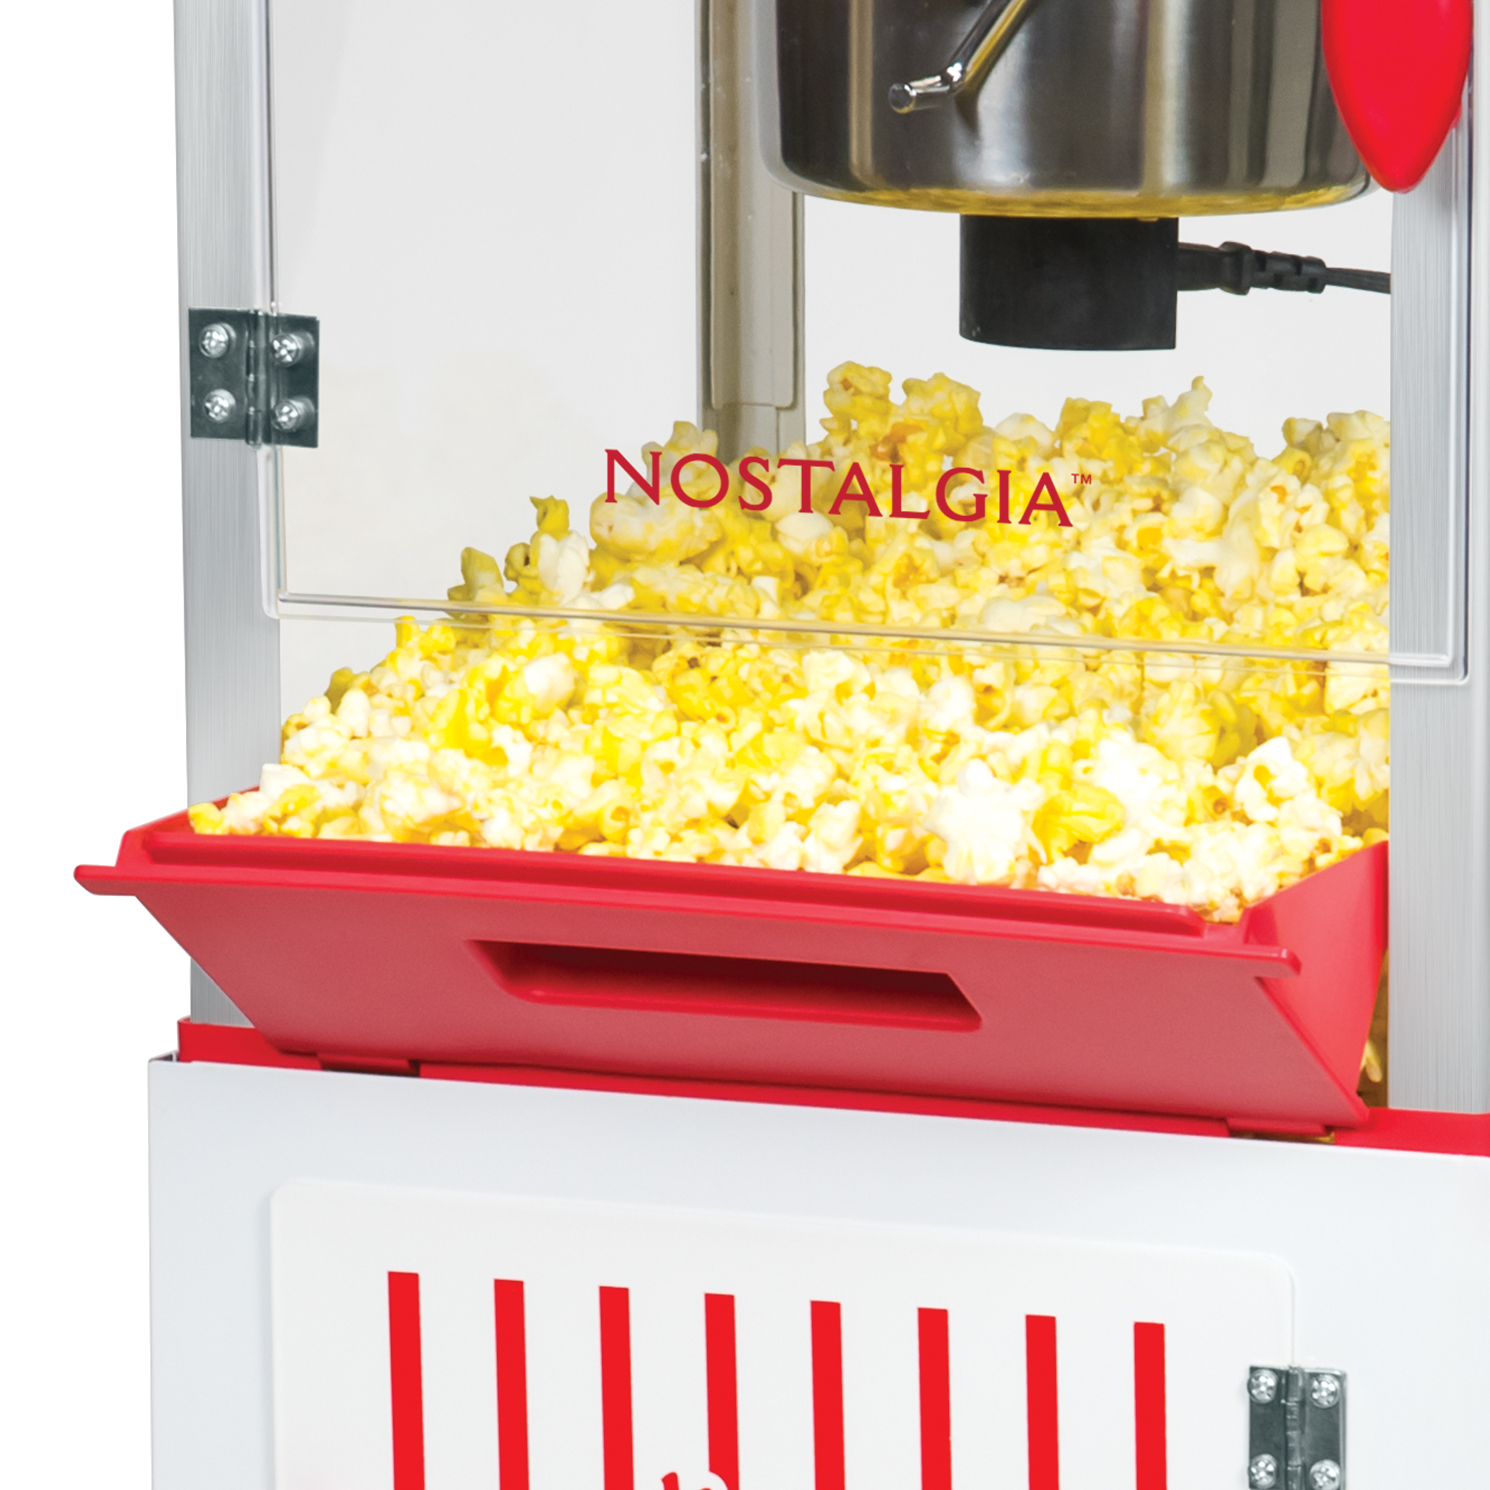 Nostalgia 2.5 oz Popcorn Cart, Makes 10 Cups, 48 in Tall, Red, White, CCP399 - image 4 of 6